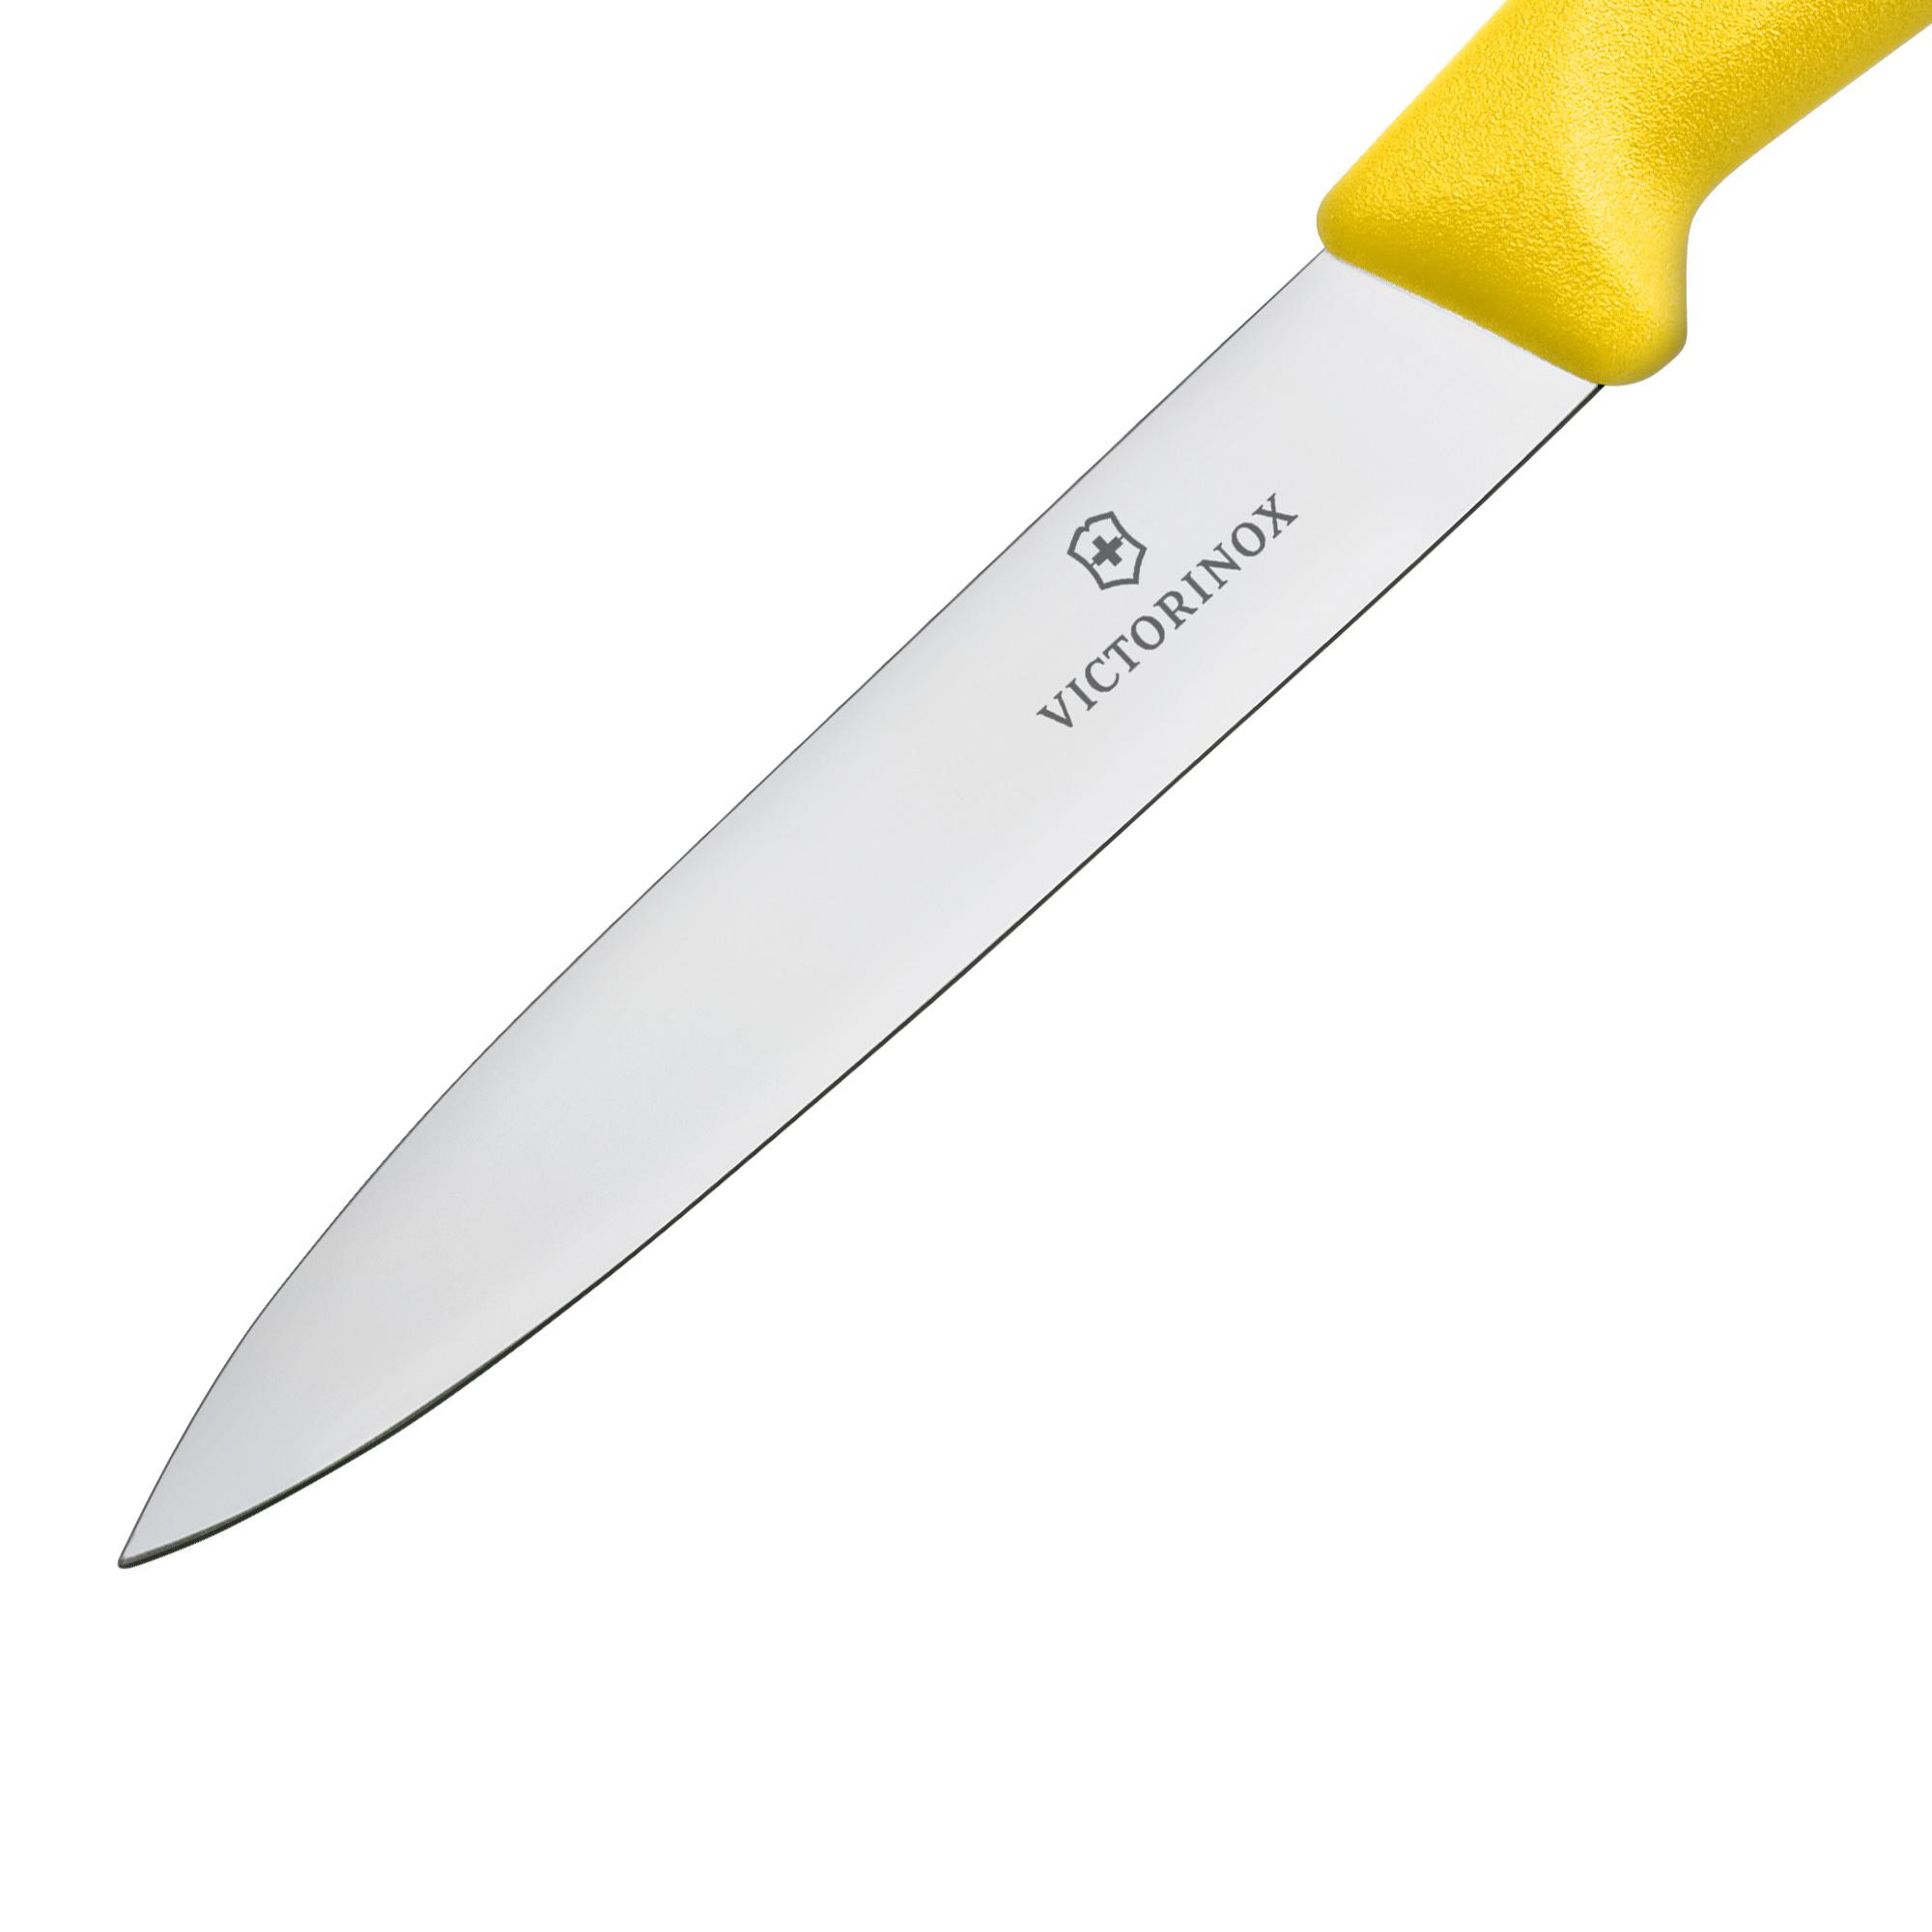 Victorinox Swiss Classic Pointed Tip Vegetable Knife 10cm Yellow Image 2